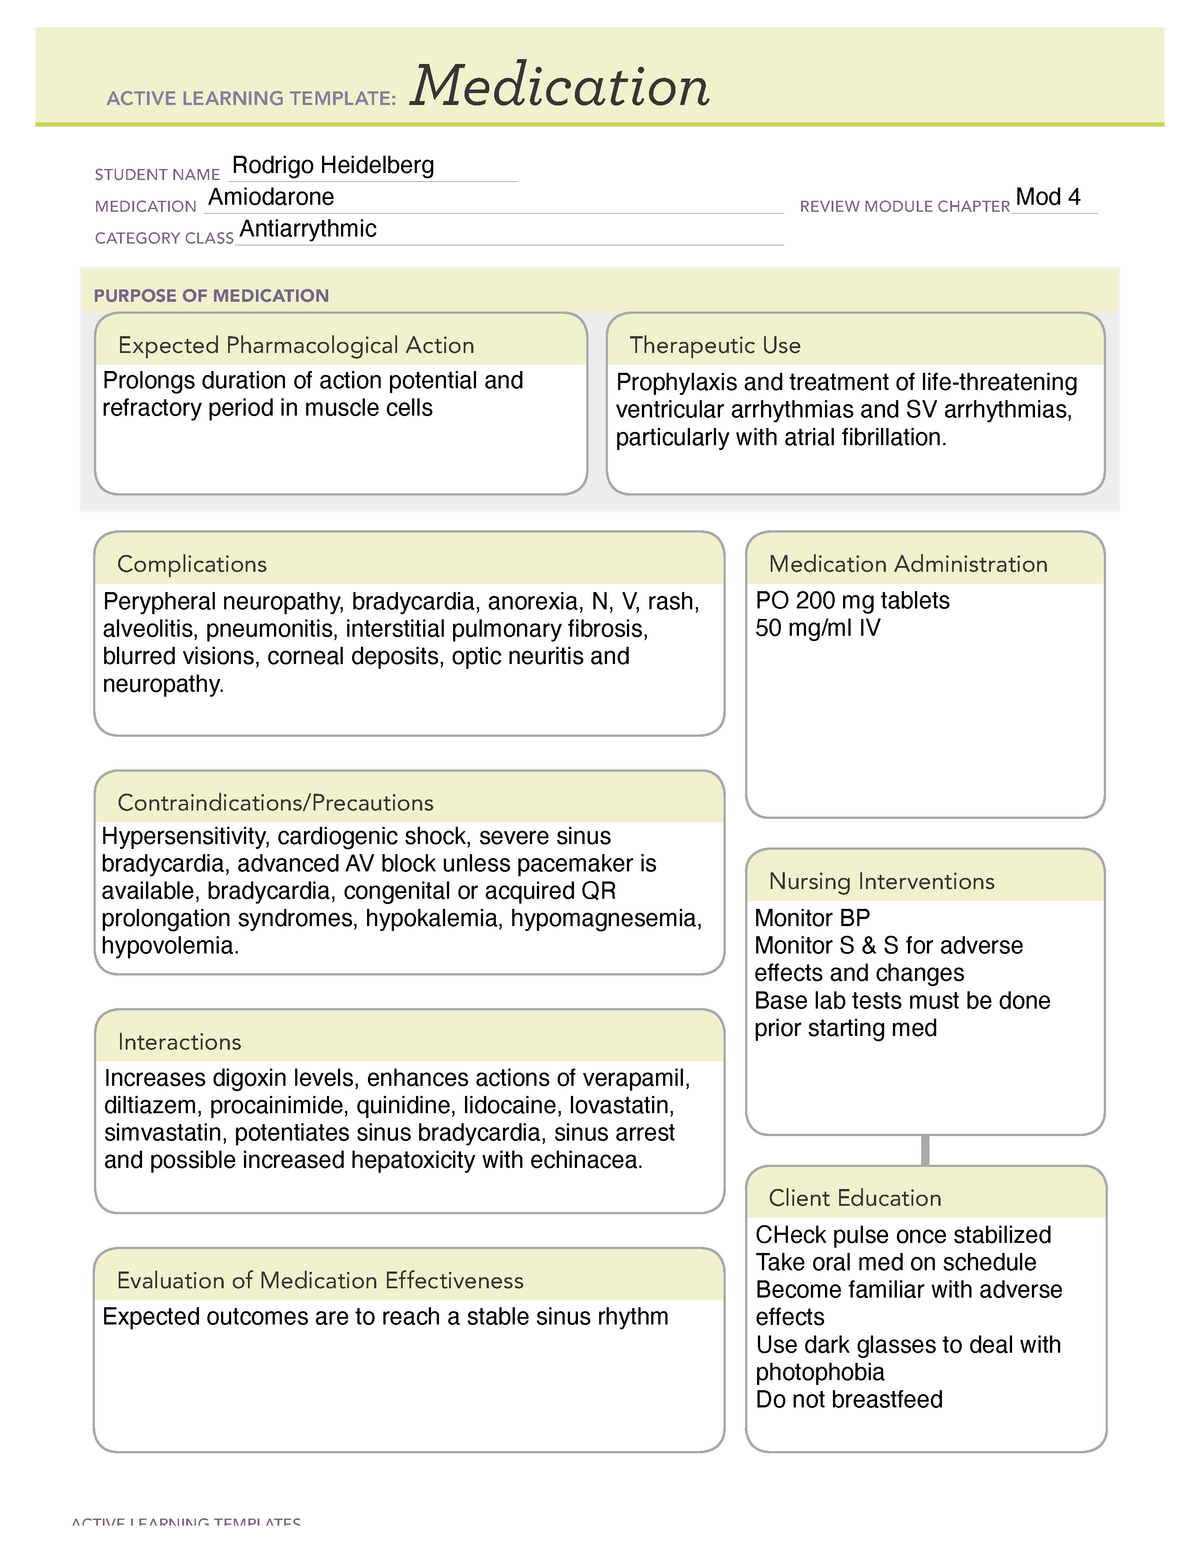 Amiodarone ATI High Acuity medication ACTIVE LEARNING TEMPLATES